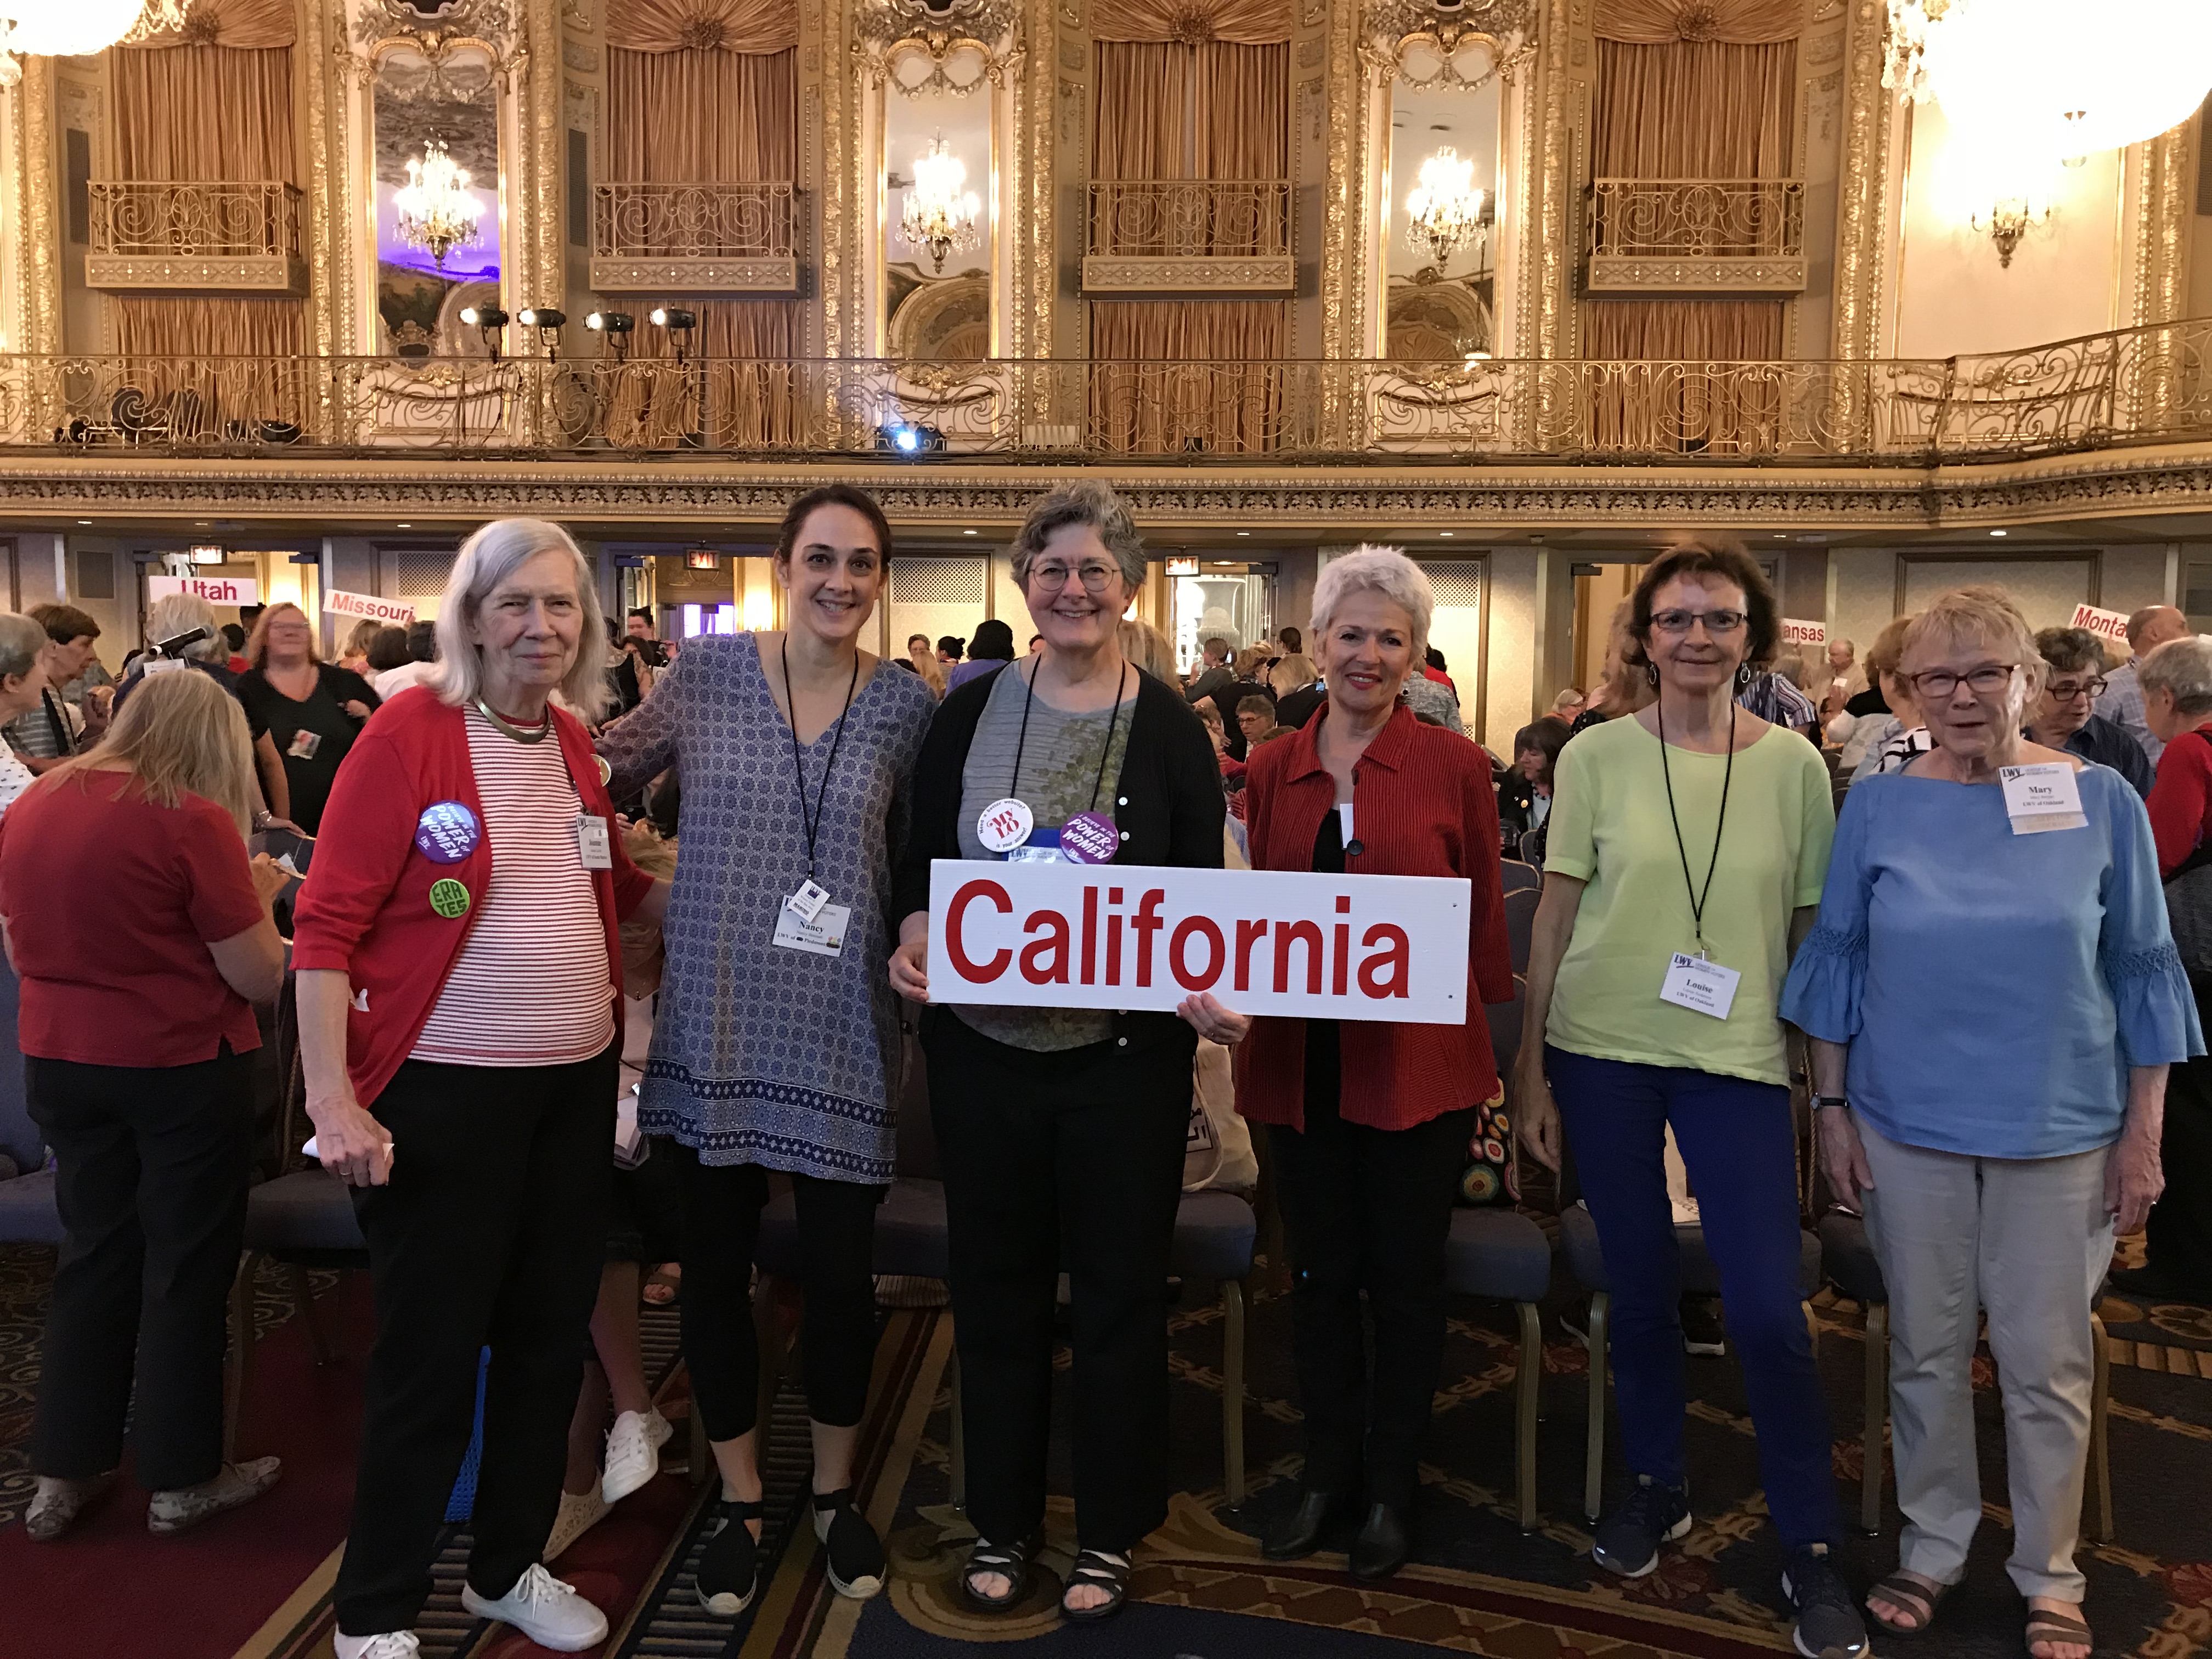 California Participants at the LWV National Convention 2018